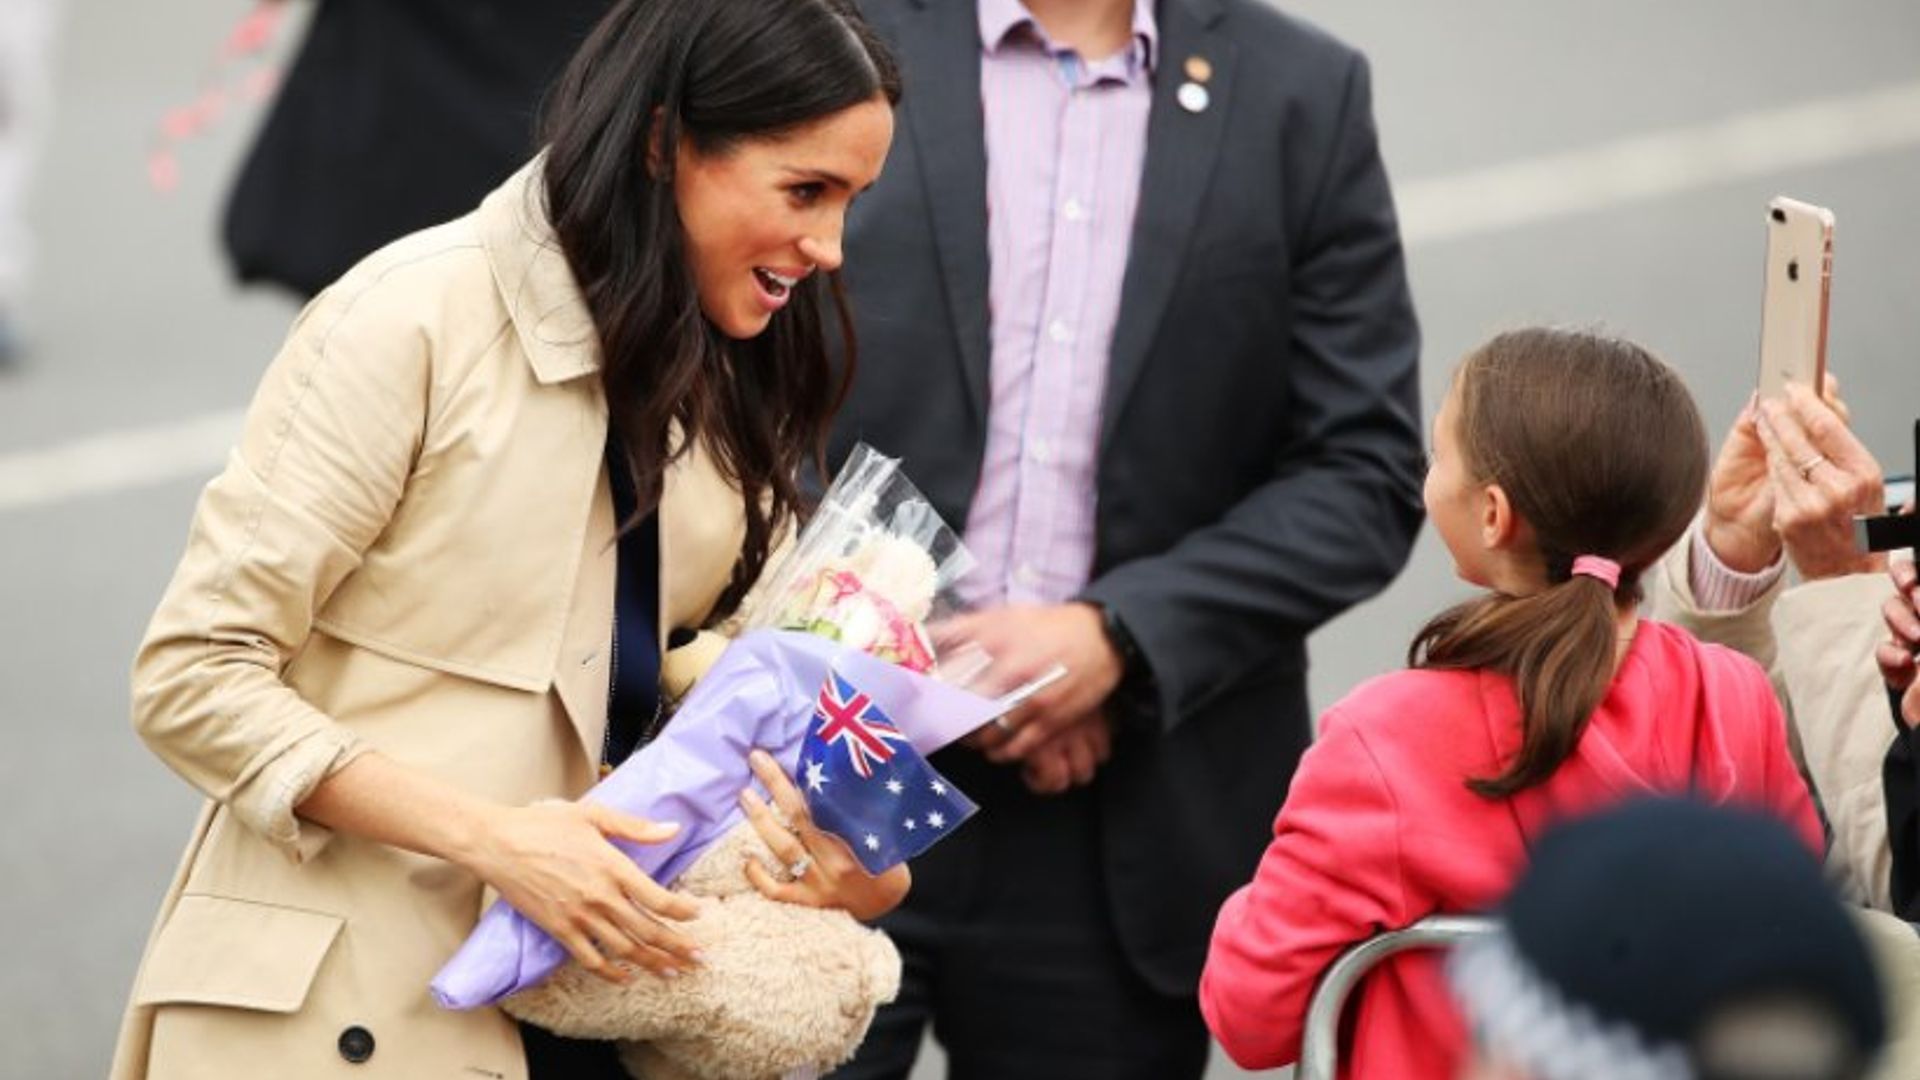 Meghan Markle looks chic in a navy dress for a visit to Melbourne (and we love her Gucci bag!)